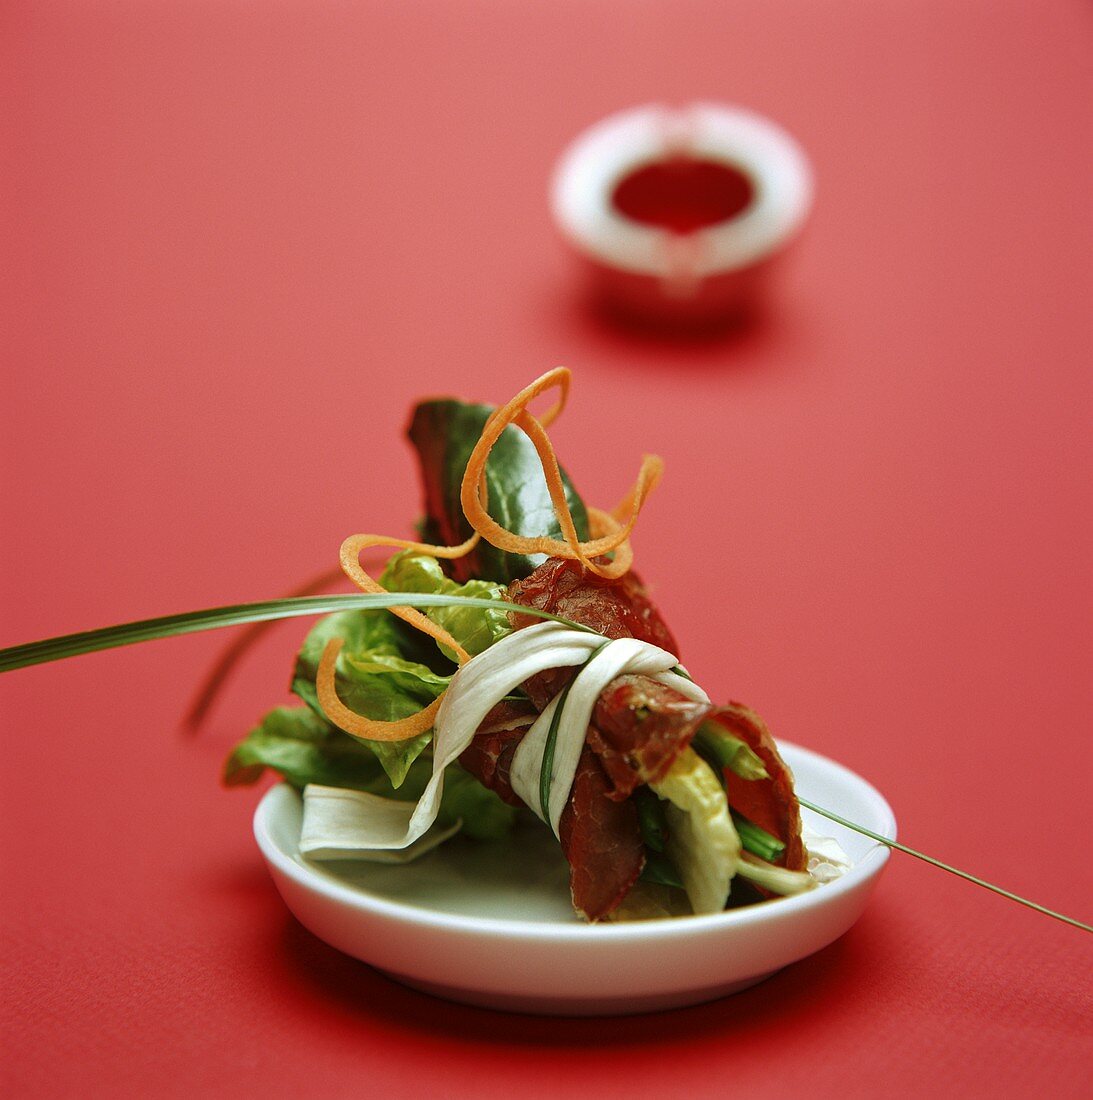 Bundle of fresh salad leaves wrapped in air-dried beef